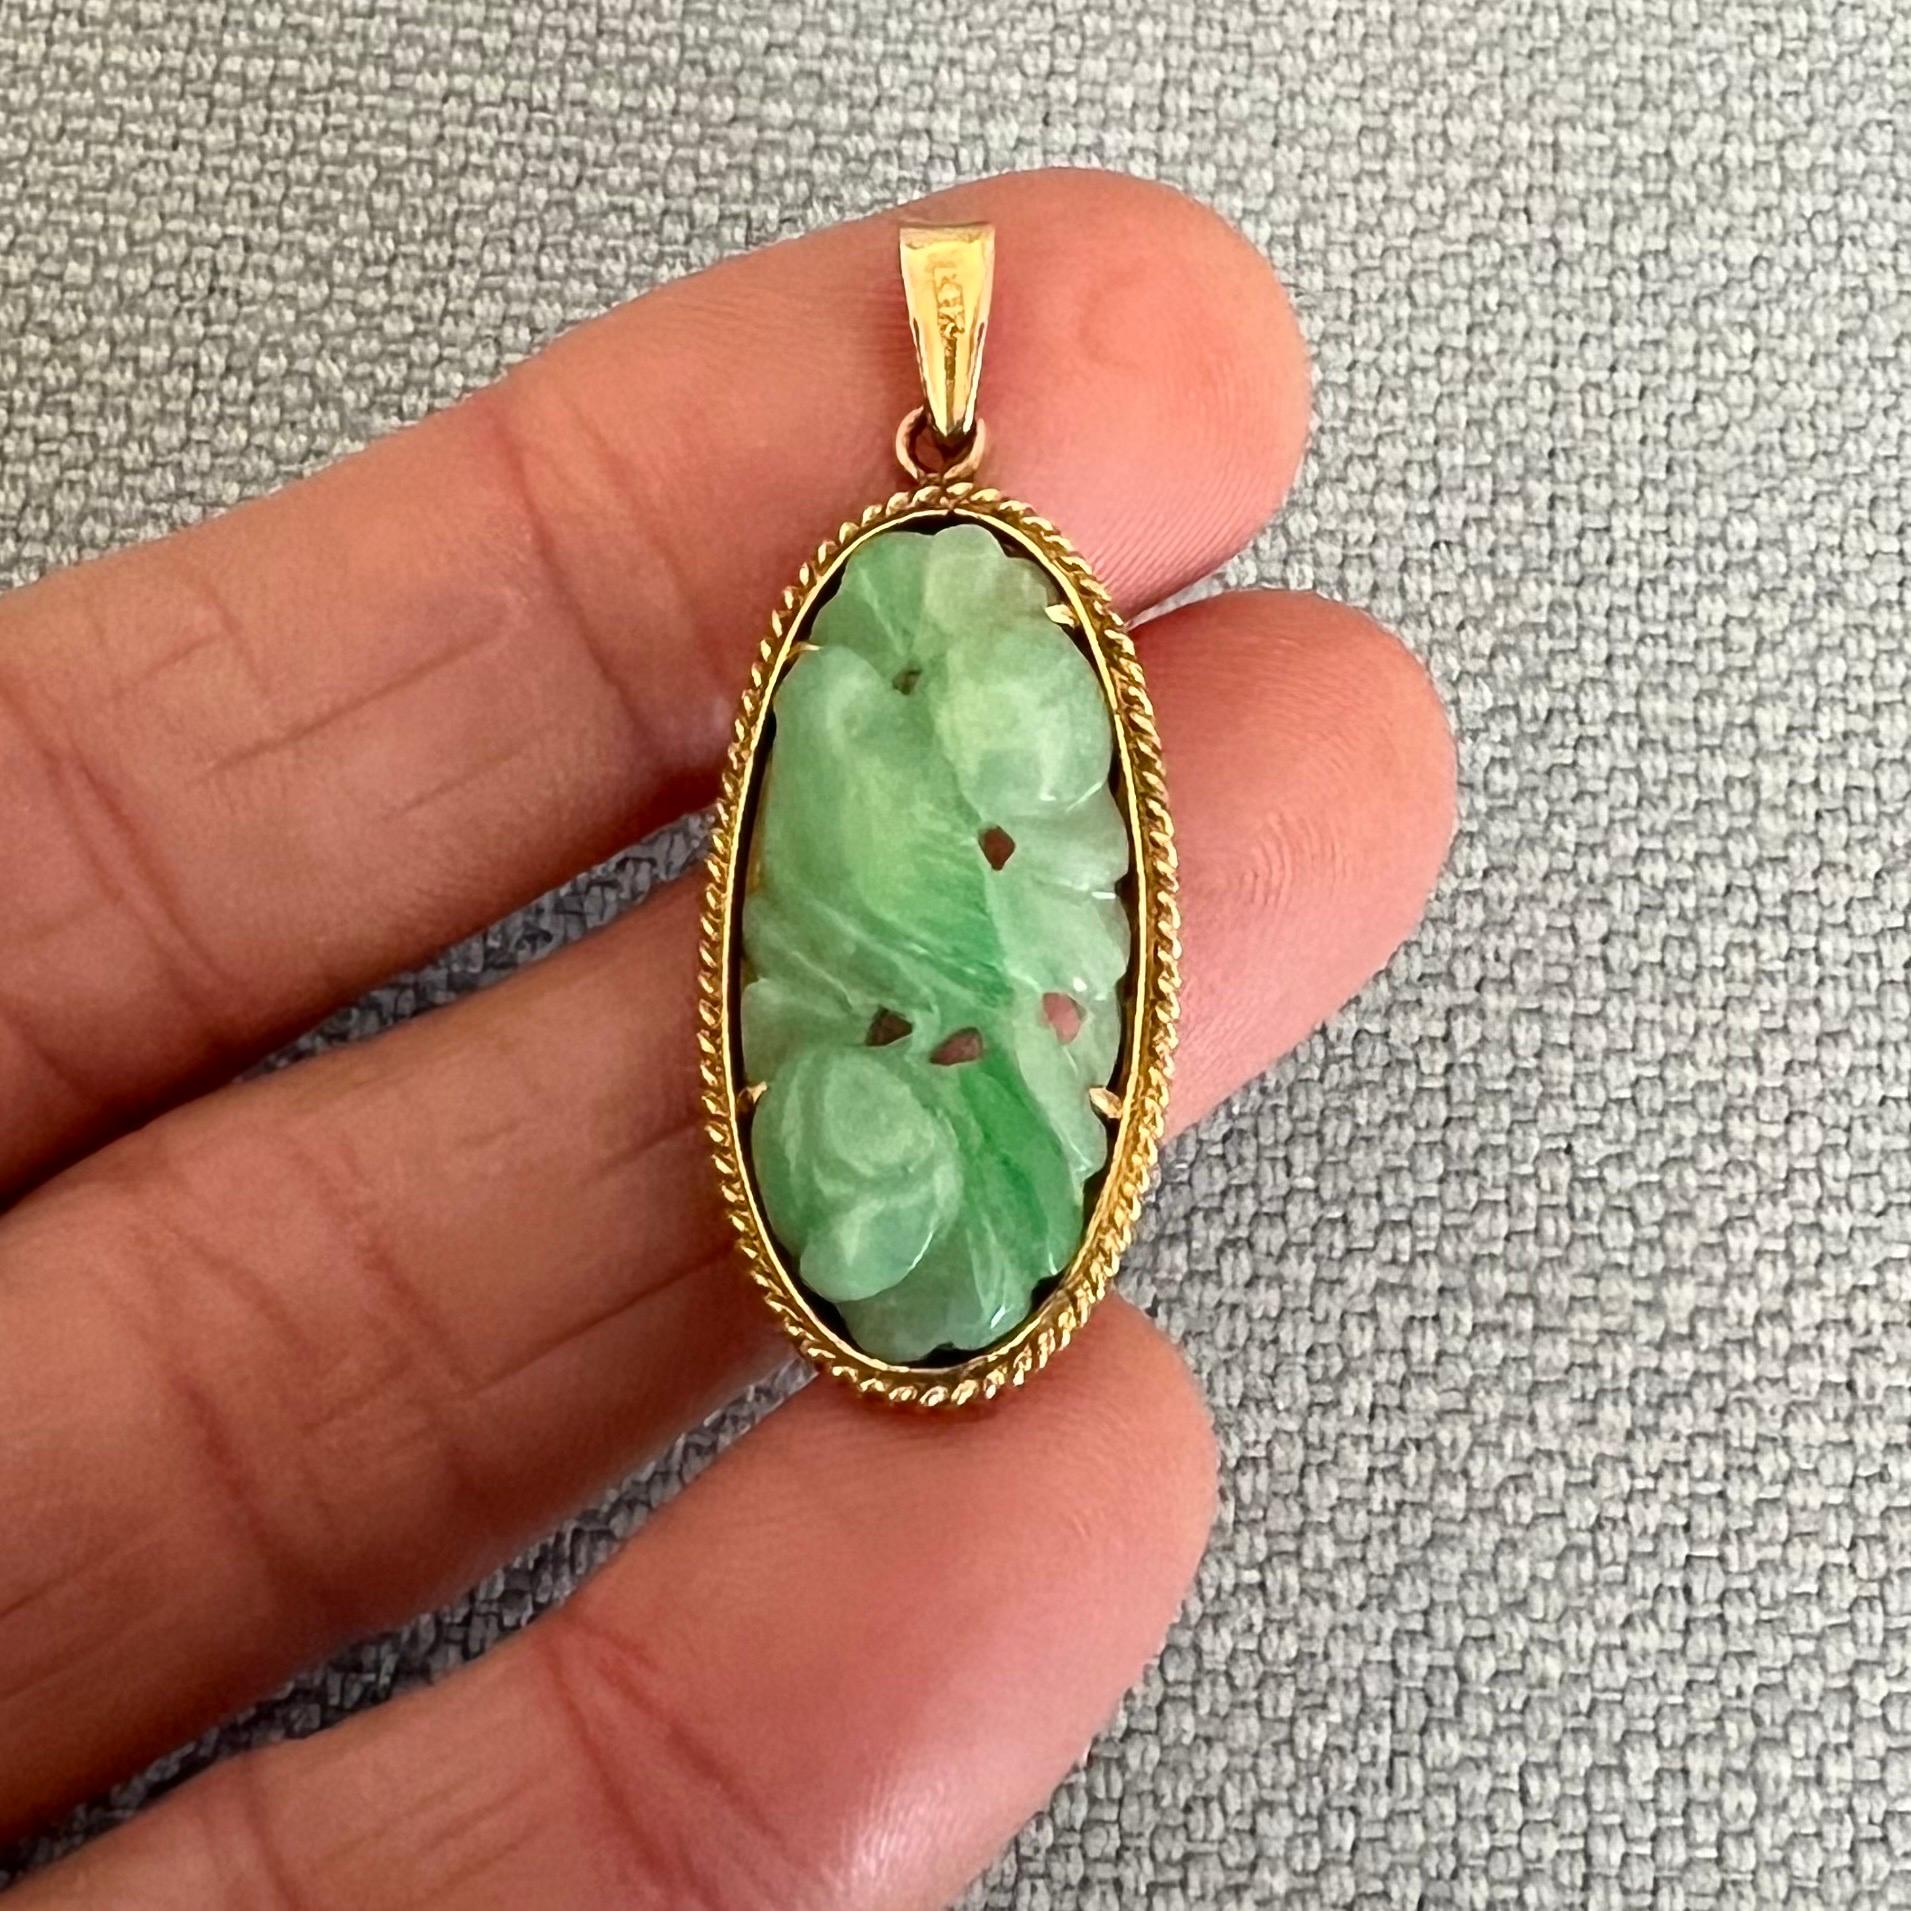 A jadeite jade carved bird pendant set in a gold frame. The jadeite jade pendant is set in a 14 karat gold oval-shaped frame surrounded by a gold rope motif. The jade is beautifully carved into a floral decor with a bird resting on a branch - the